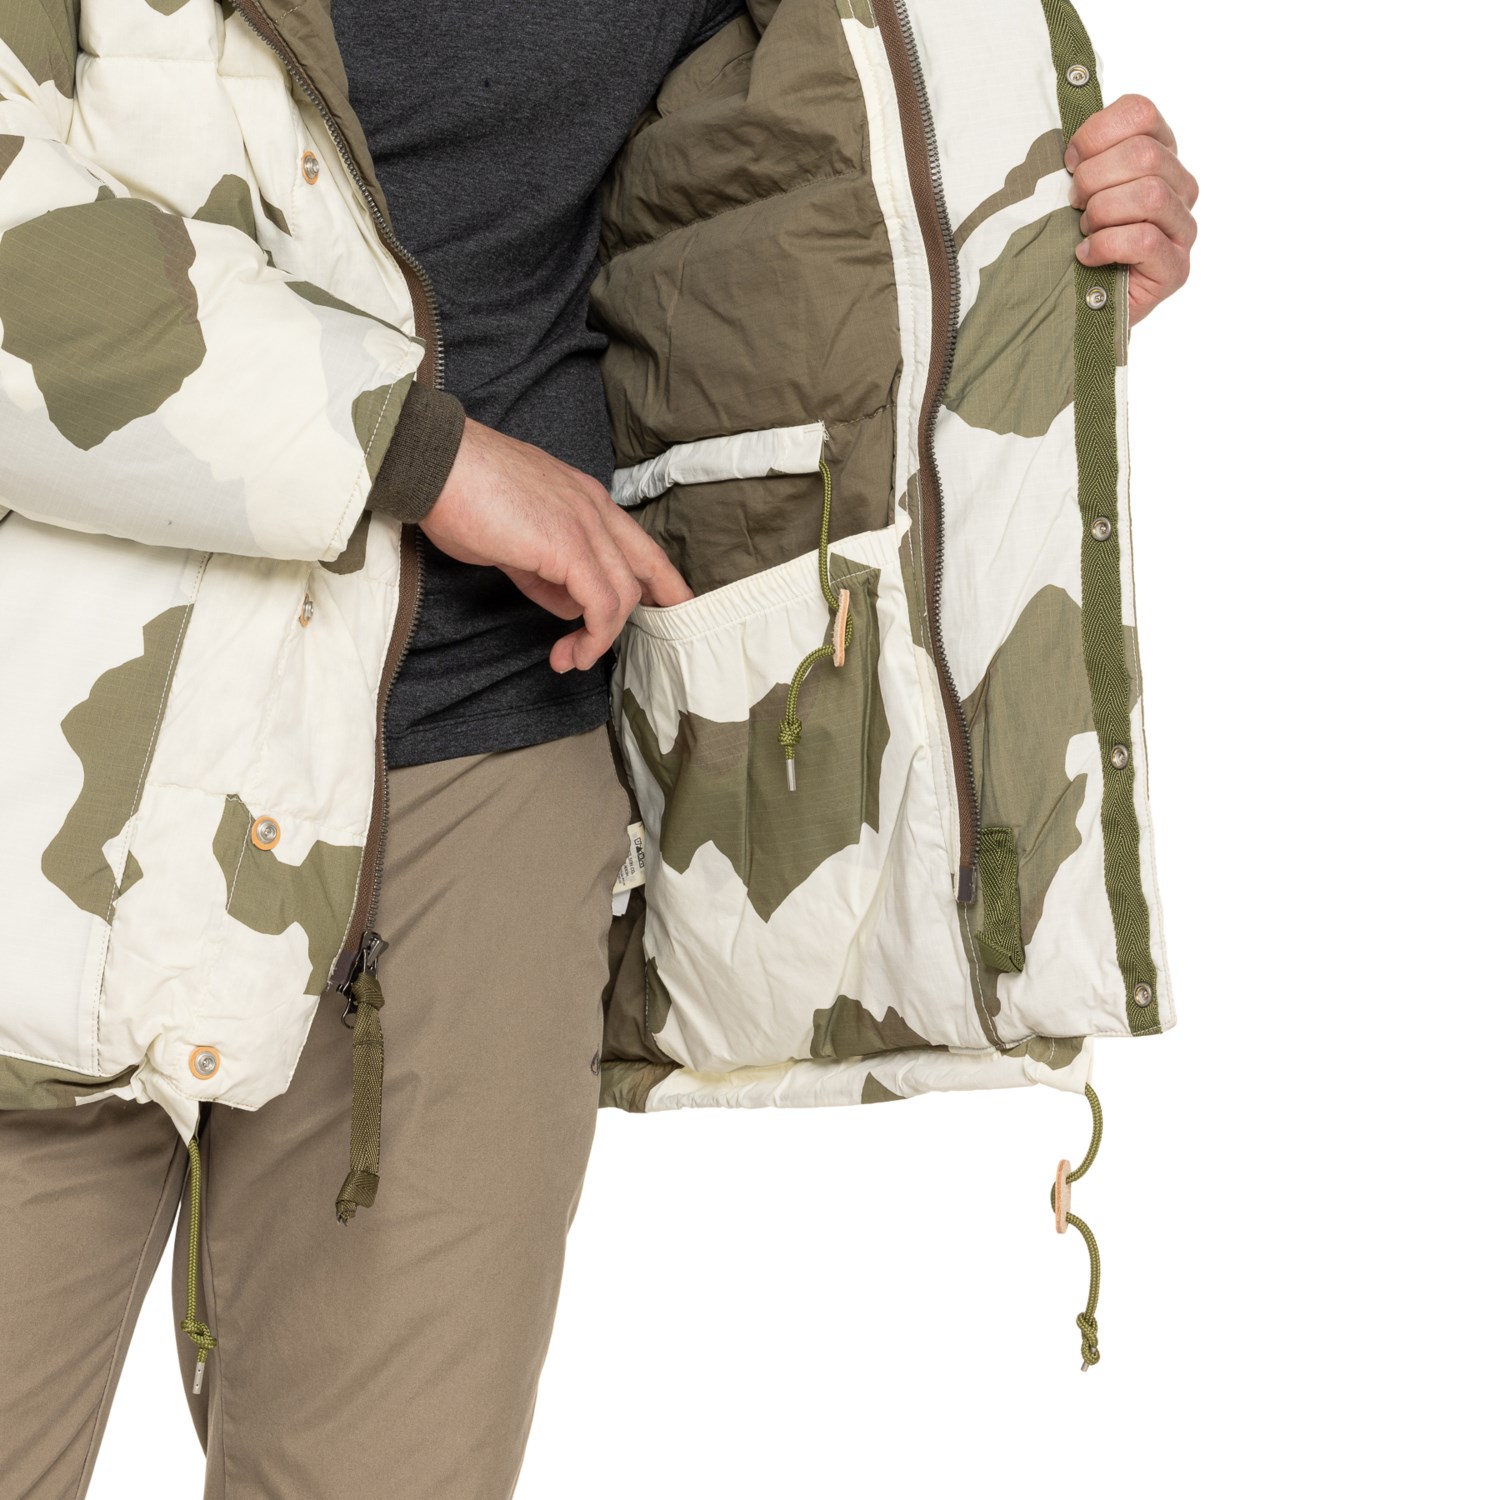 Filson Chilkoot Expedition Down Parka - 850 Fill Power - Save 66%